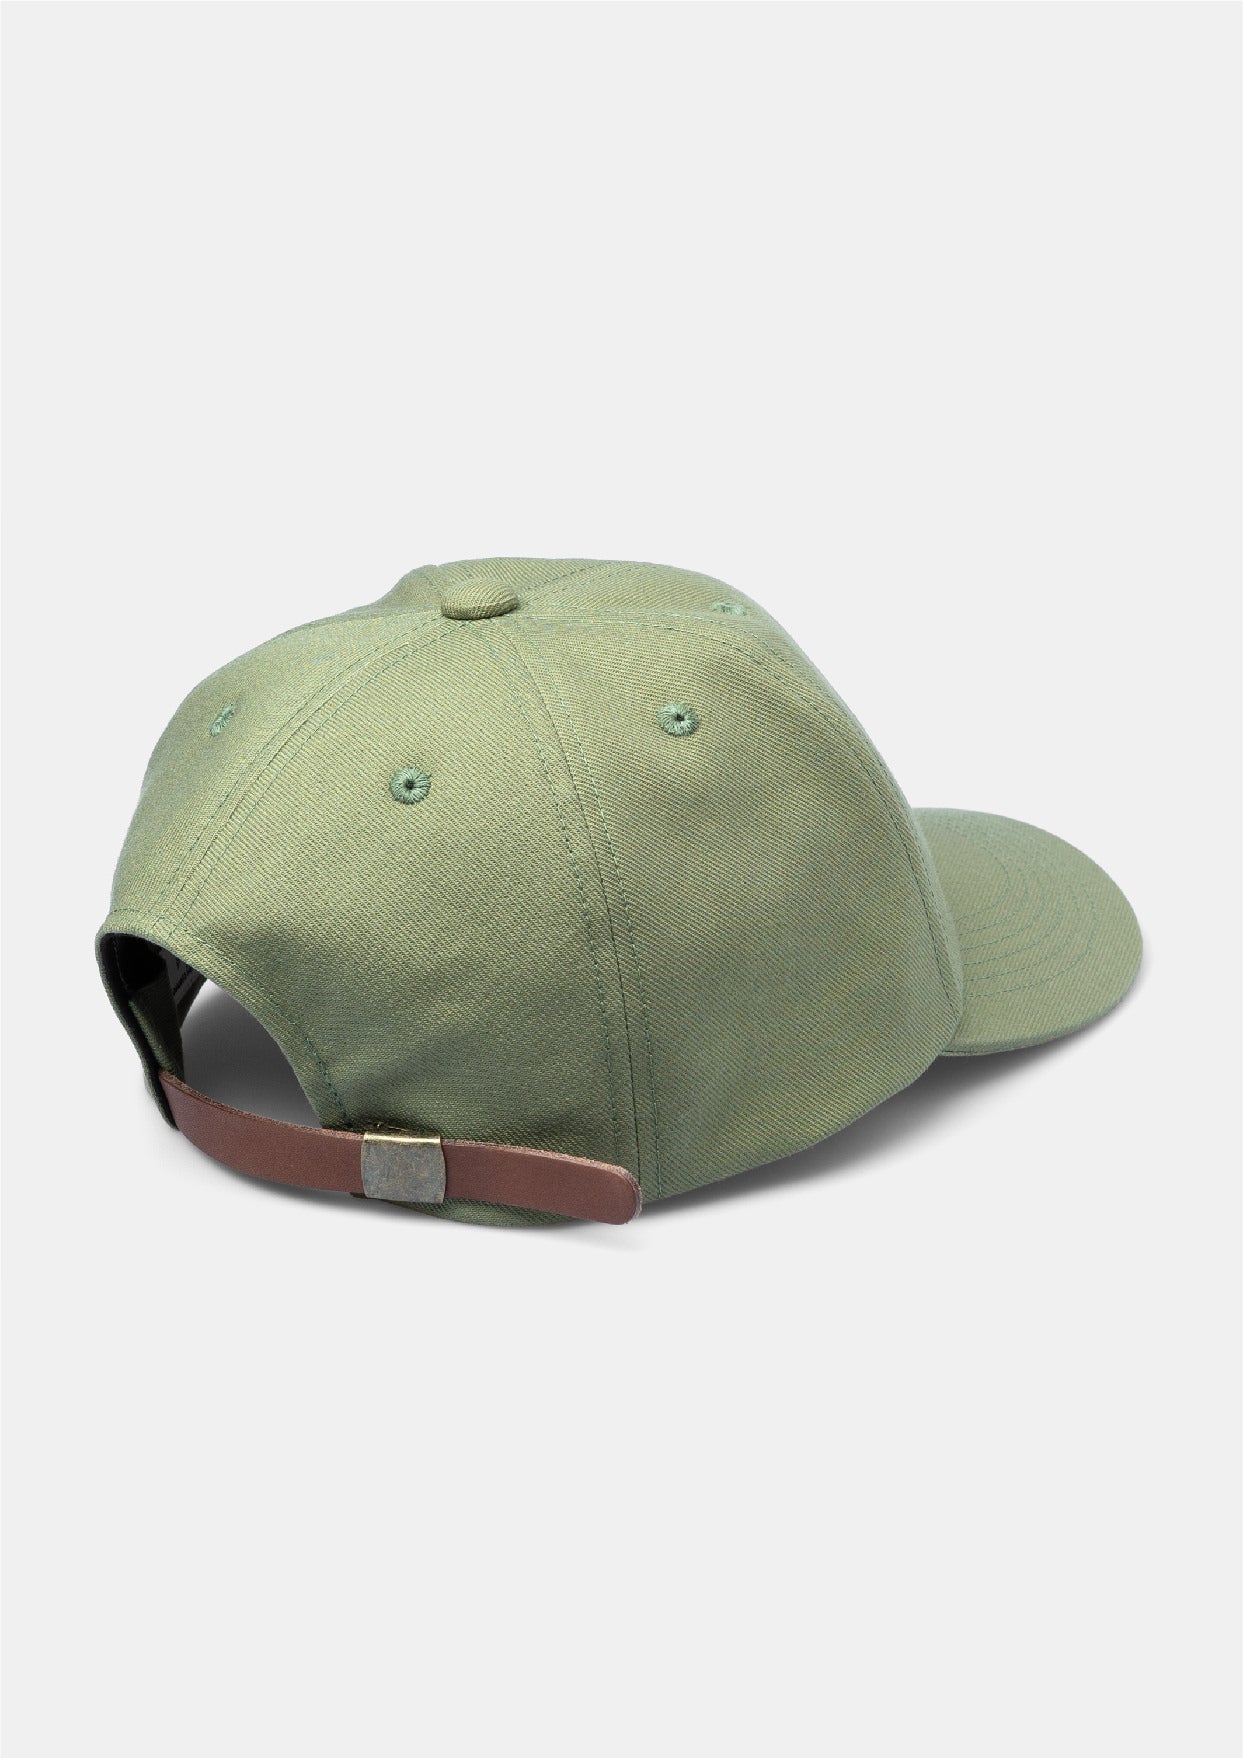 UNNAMED HEADWEAR MIDDLE CAP ベースボールキャップ 大きいサイズの帽子